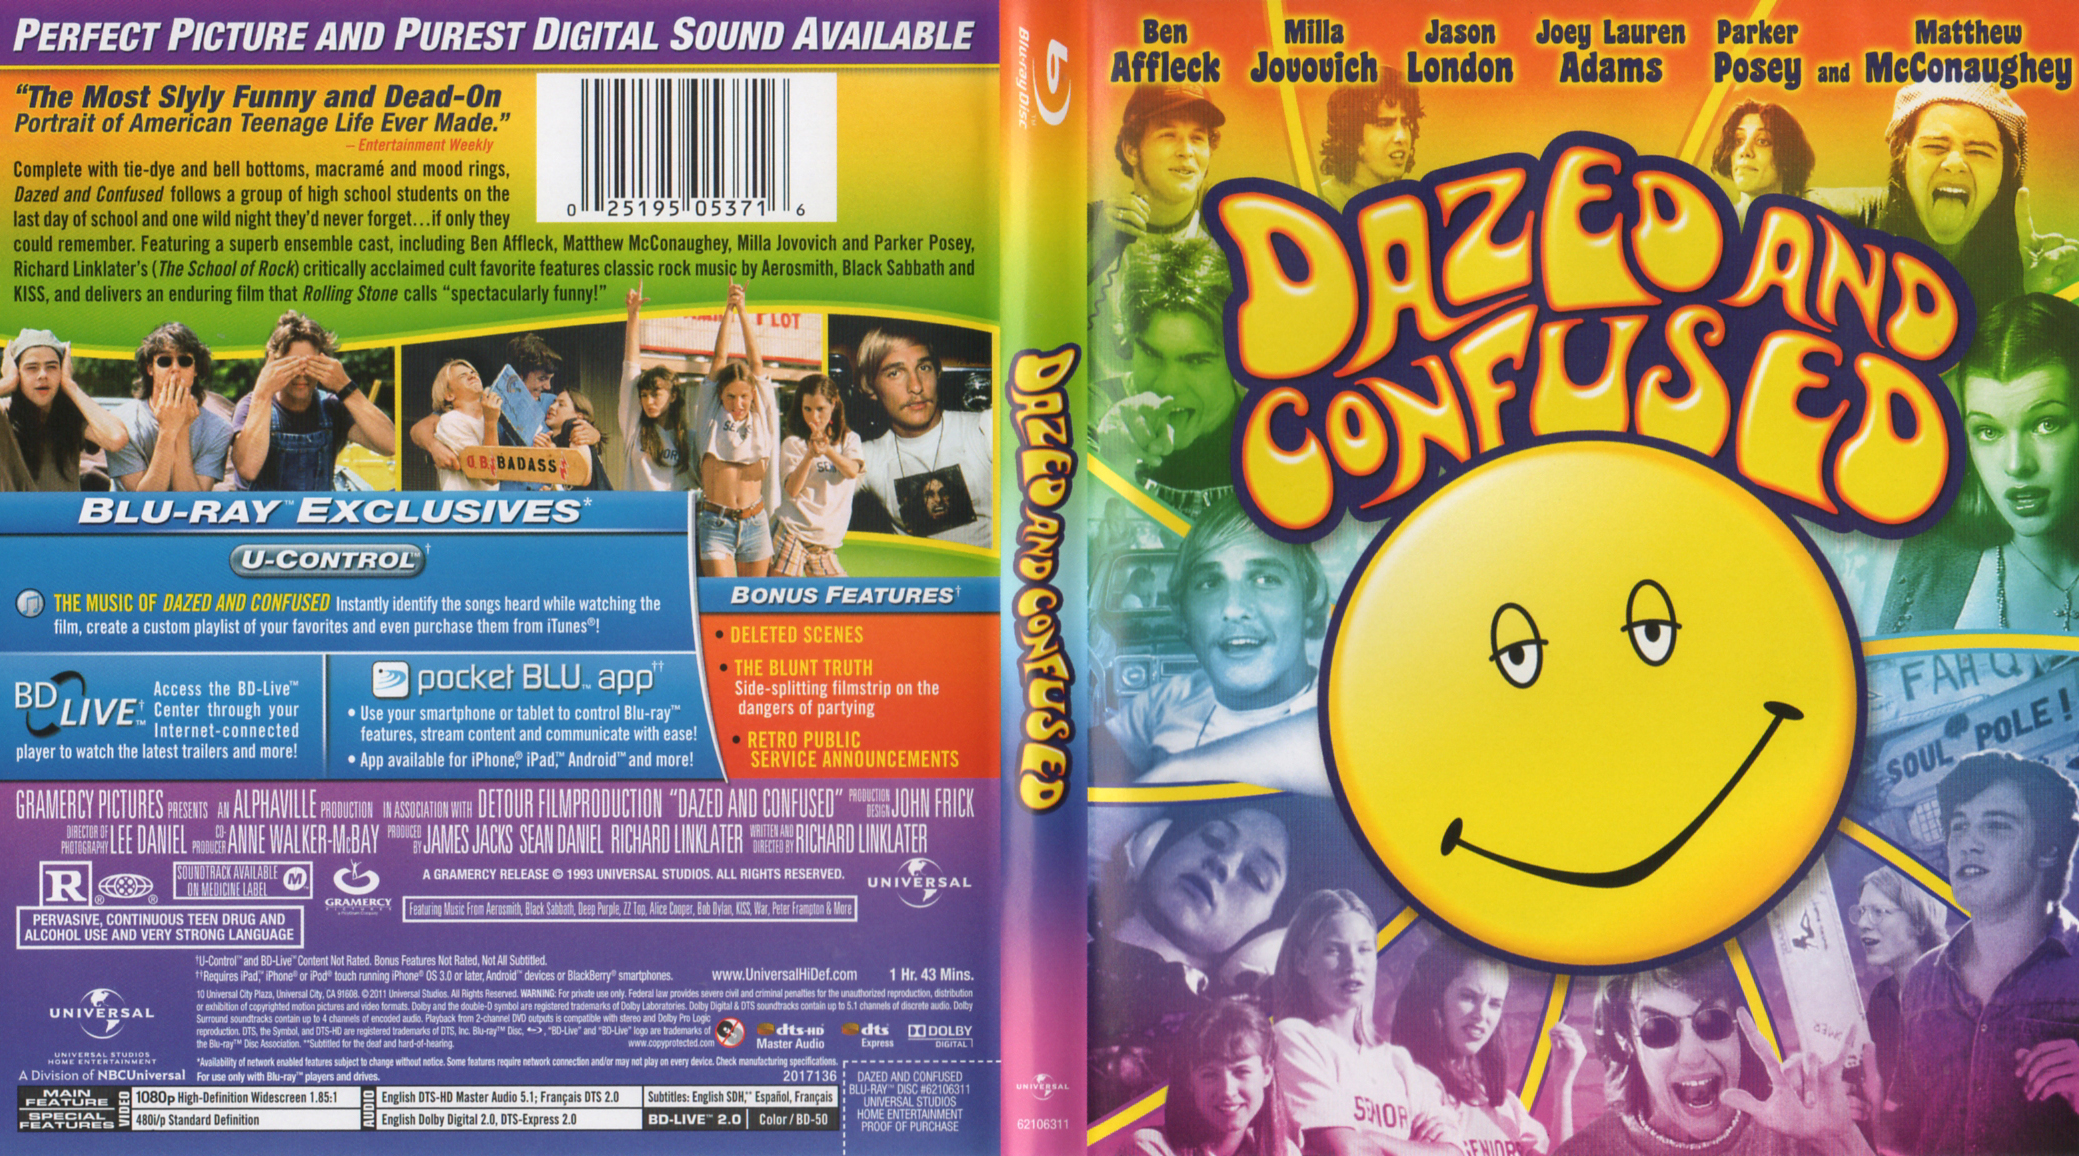 Jaquette DVD Dazed and confused - Gnration rebelle Zone 1 (BLU-RAY)